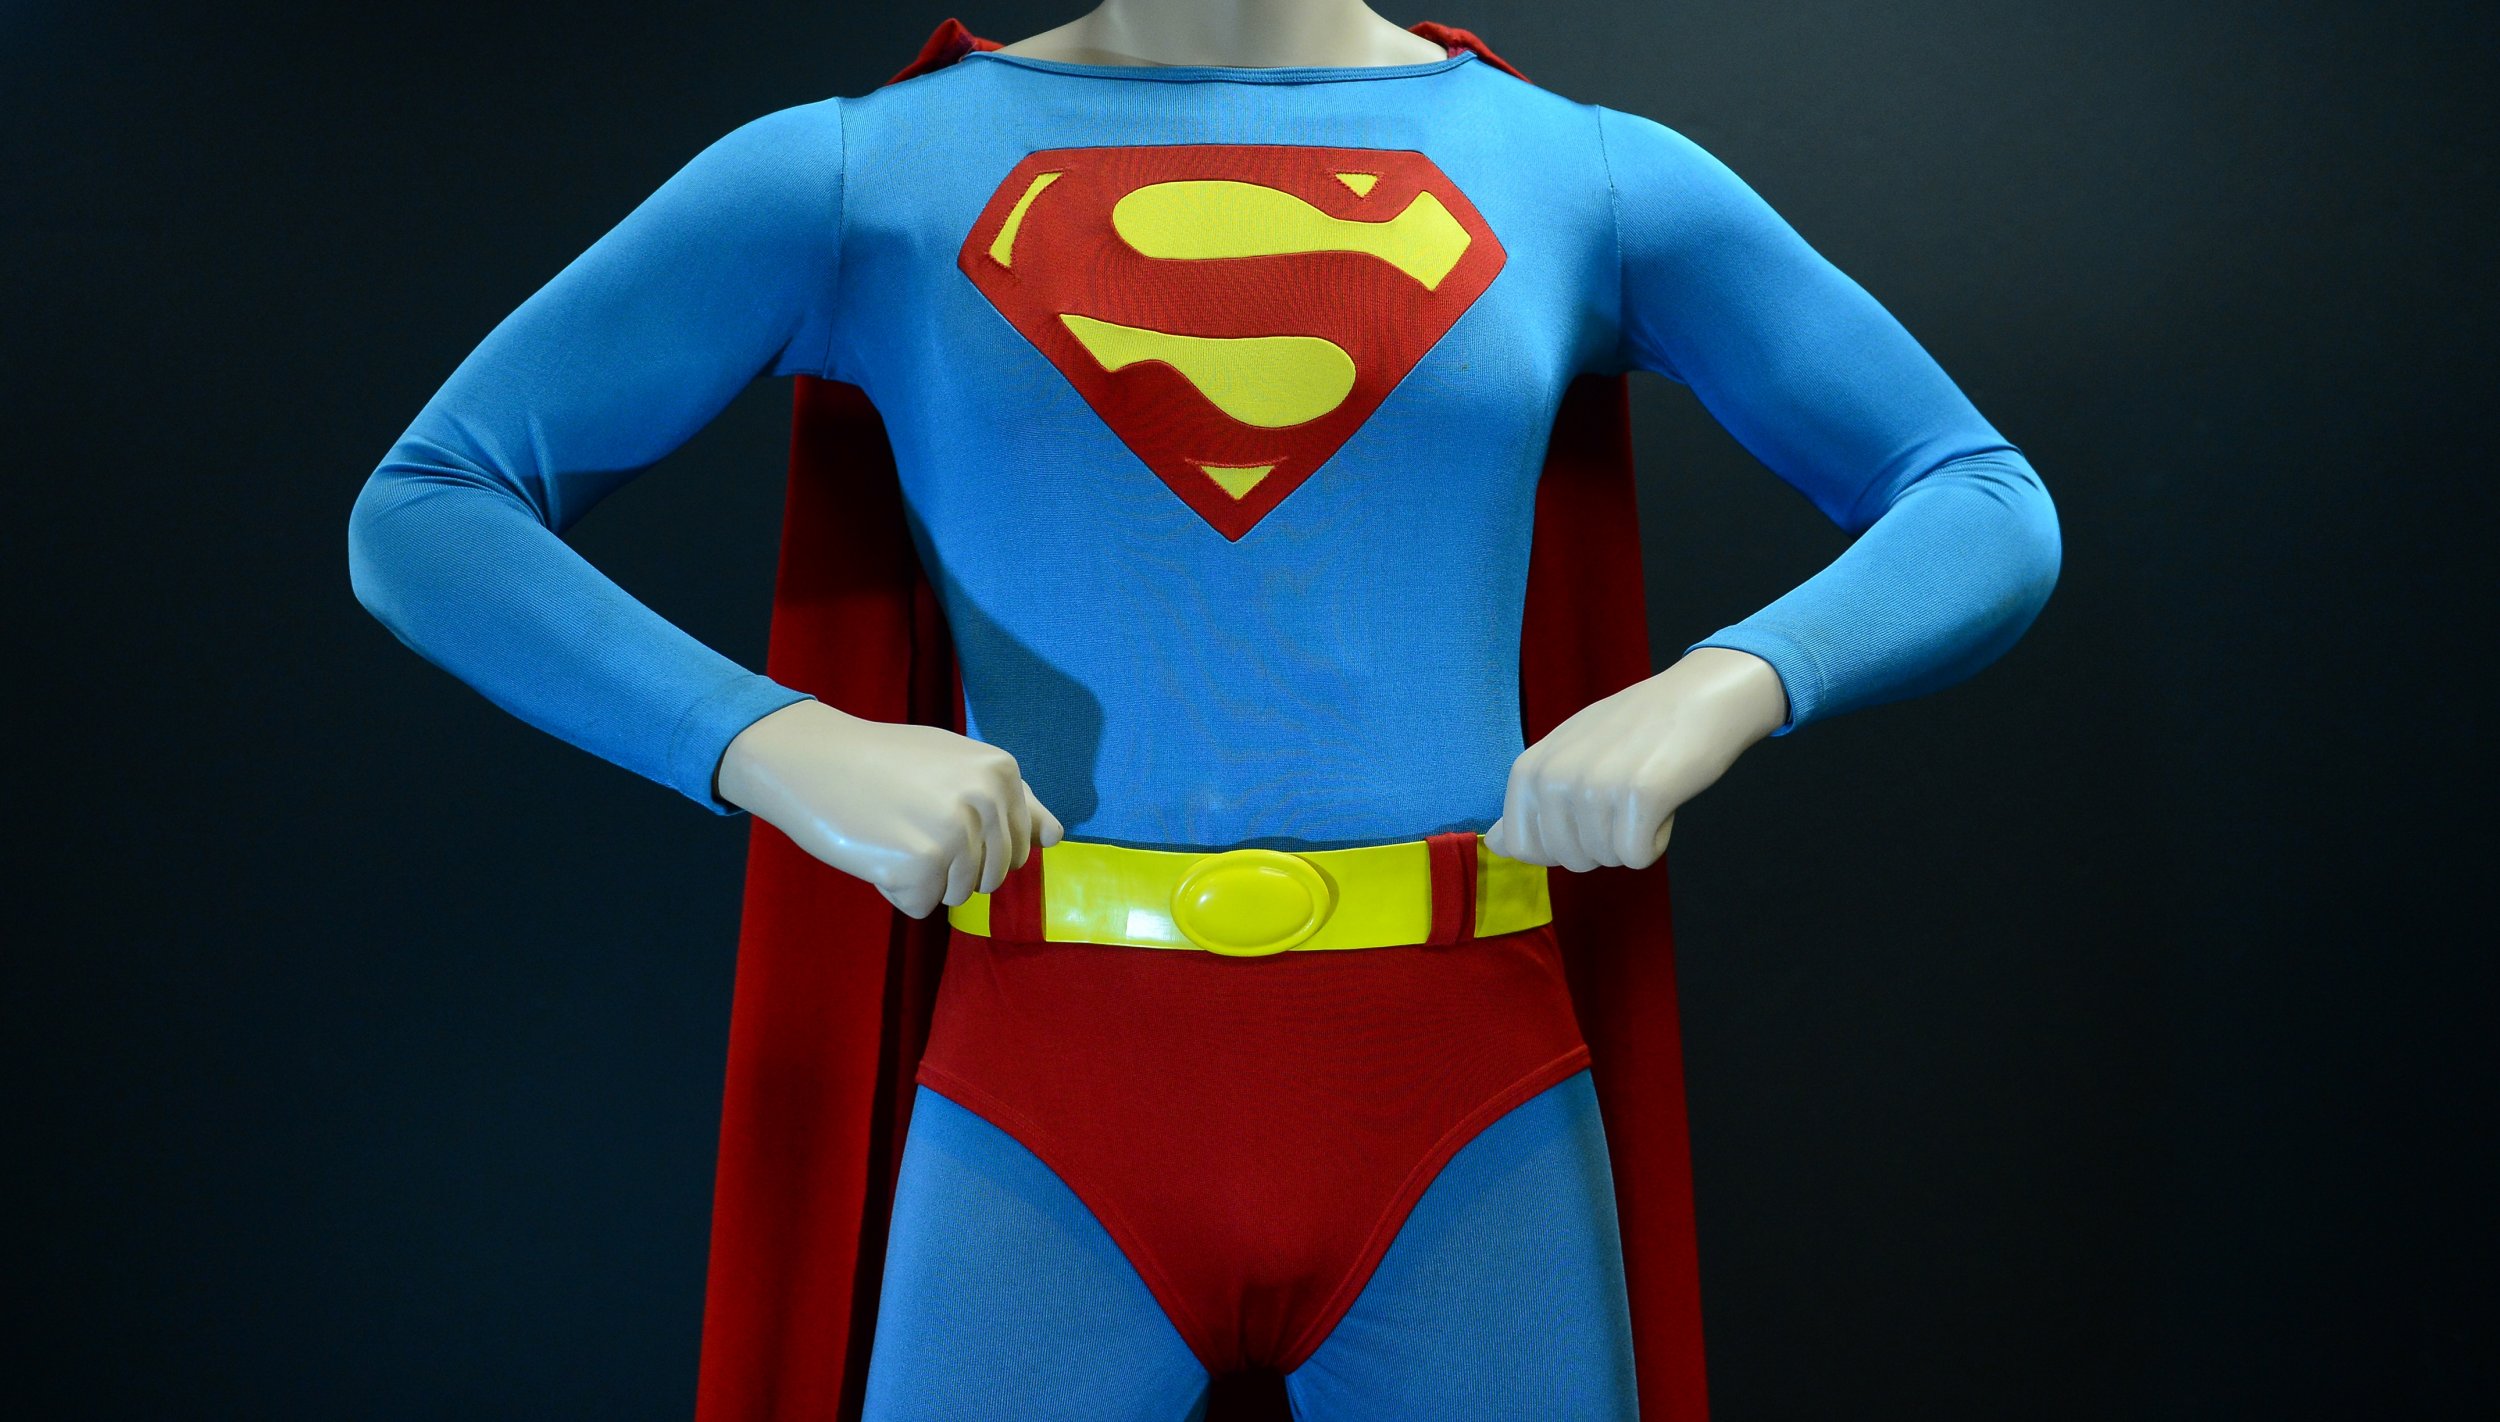 Superman costume worn by Christopher Reeve